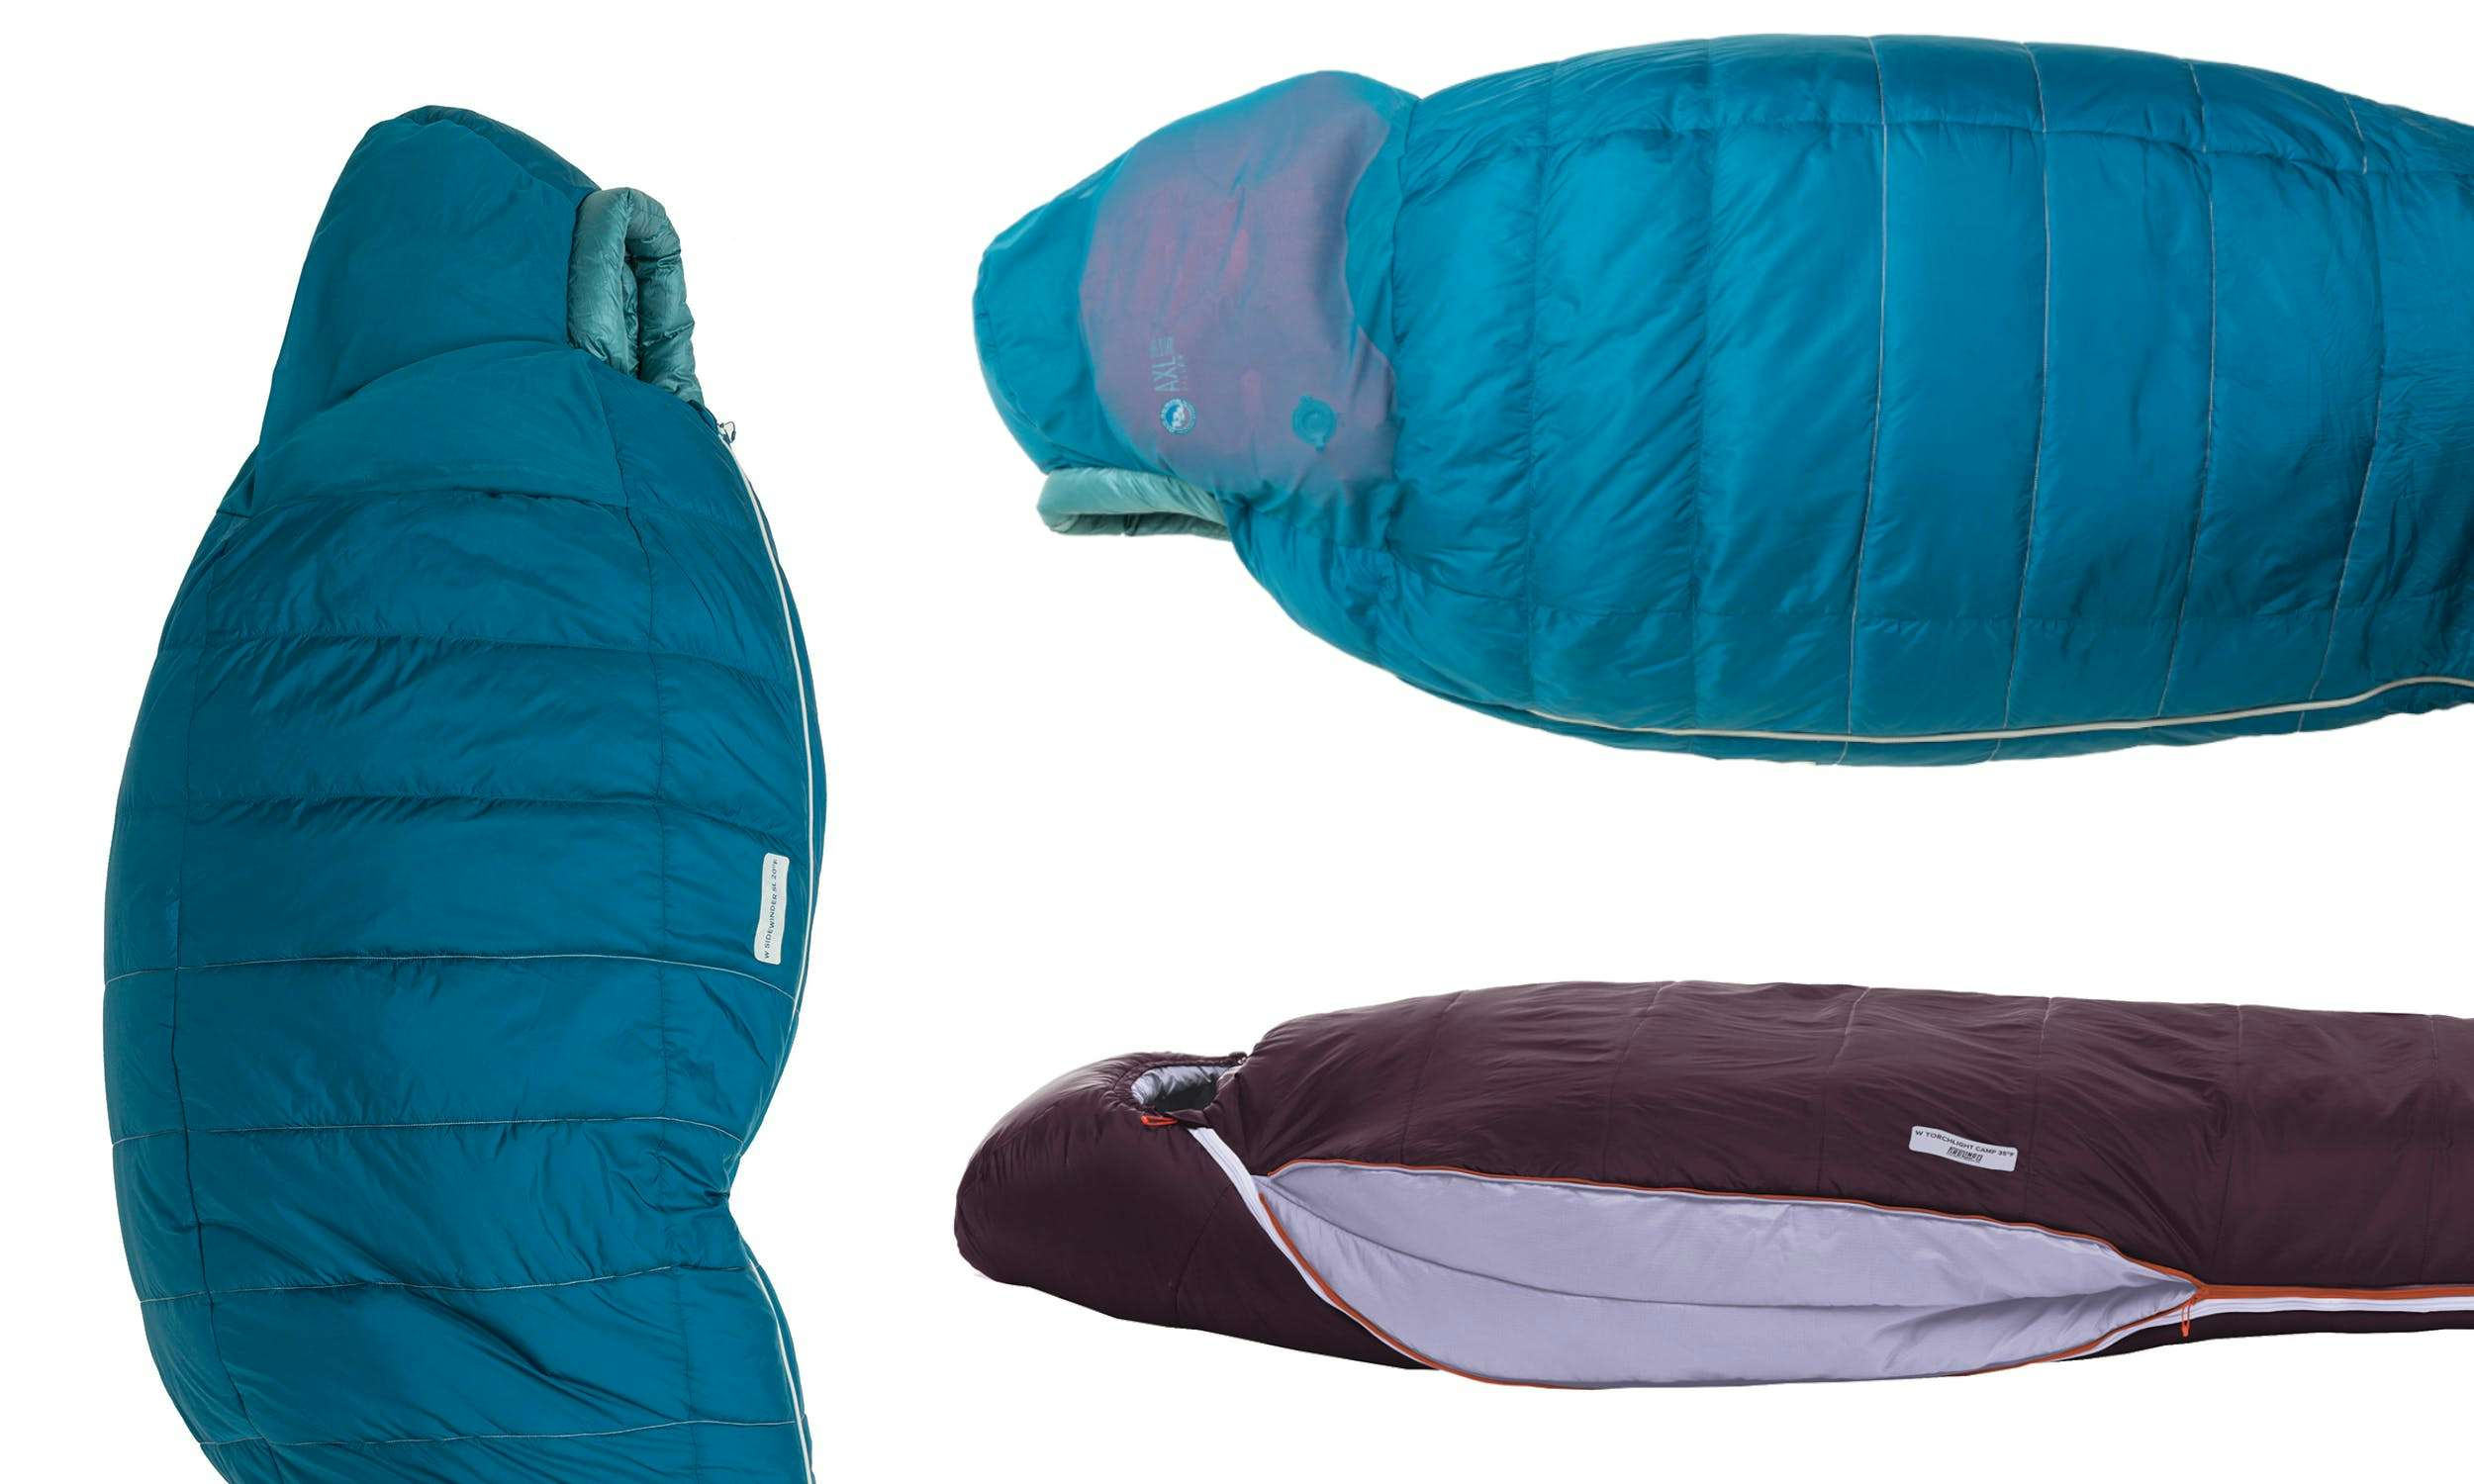 Different angles of the Big Agnes Sidewinder and Torchlight sleeping bags